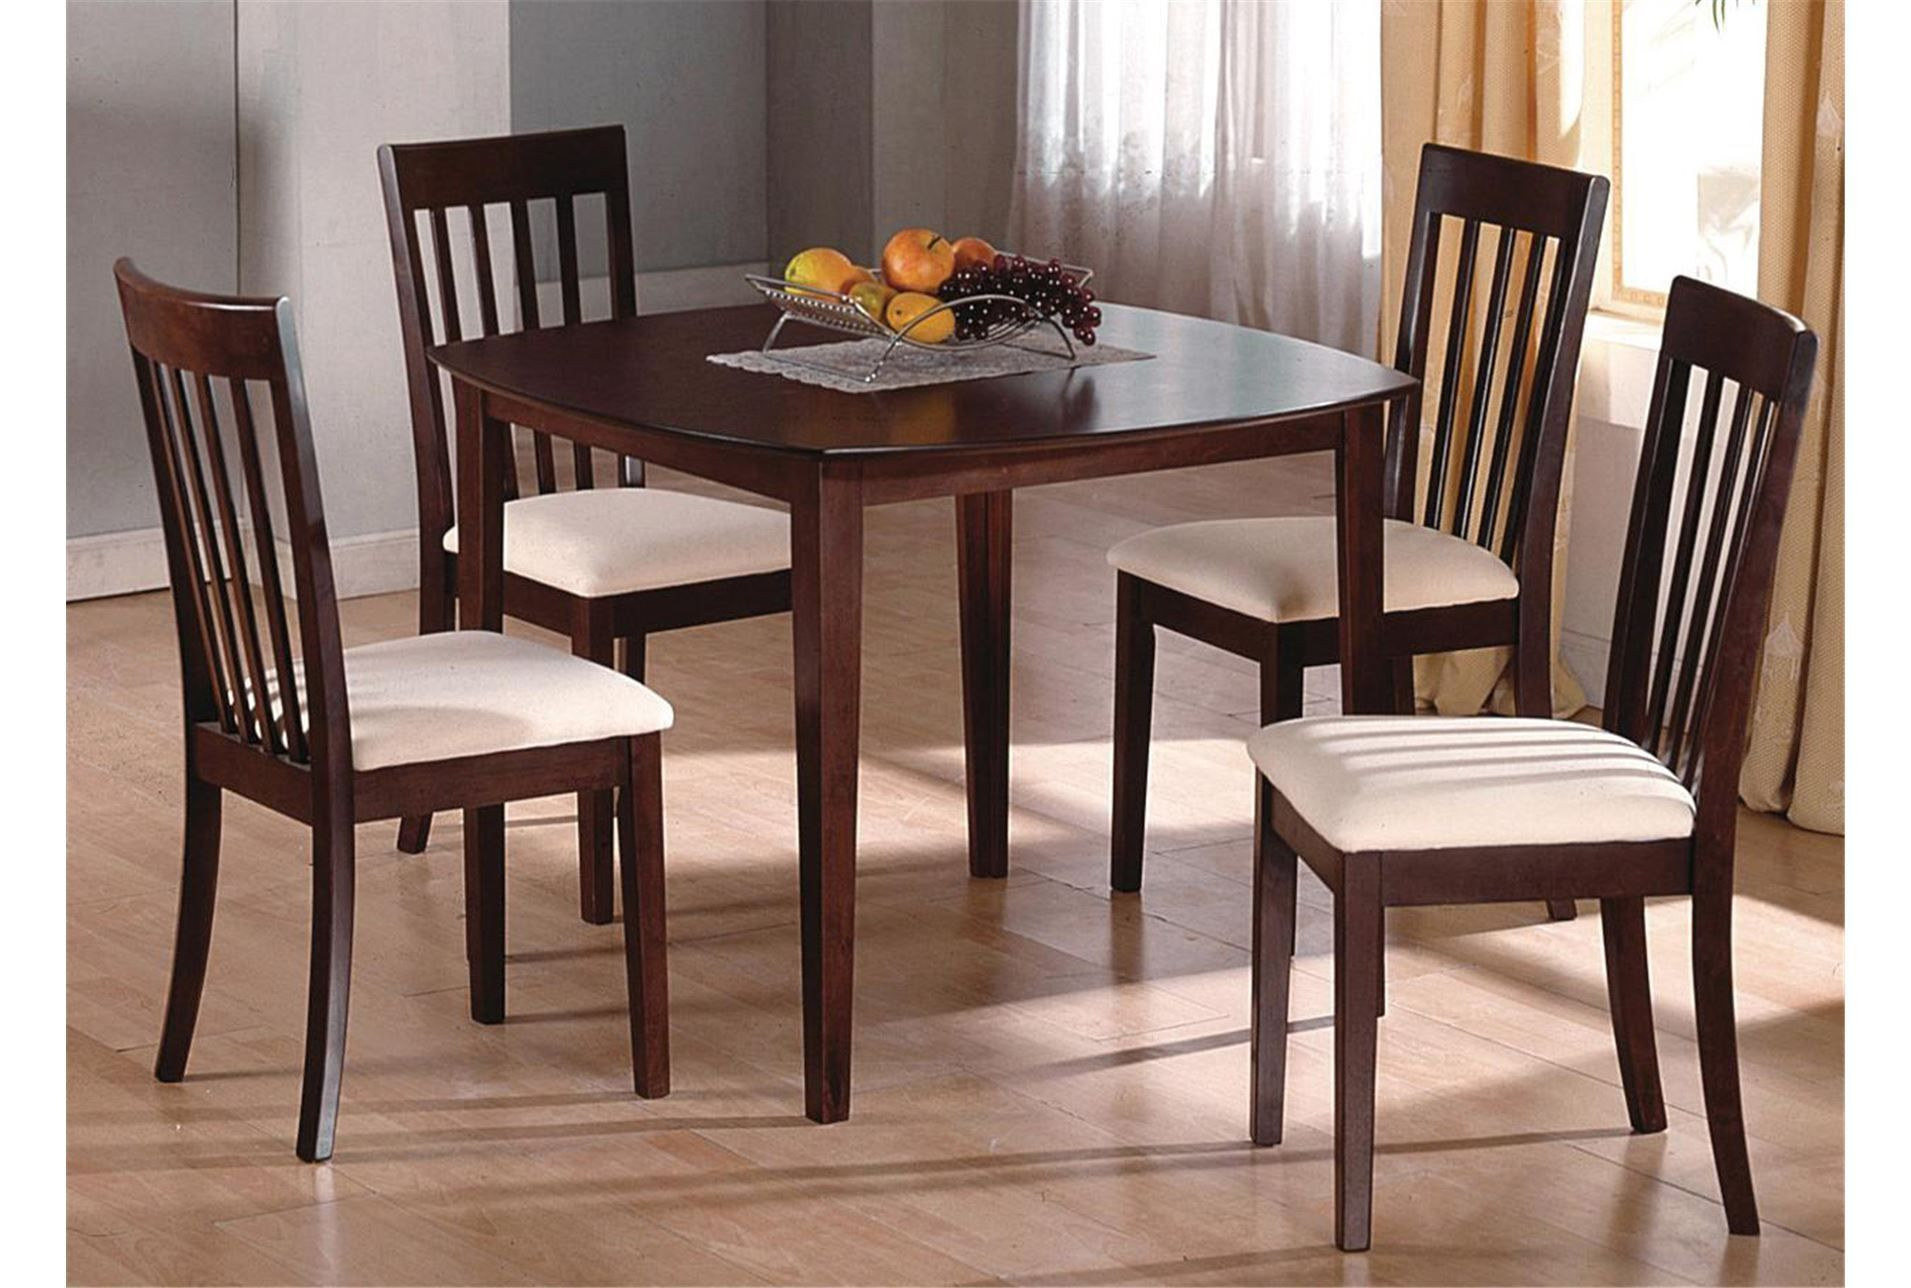 Living Spaces Dining Table Set
 Affordable pact dining set from Living Spaces